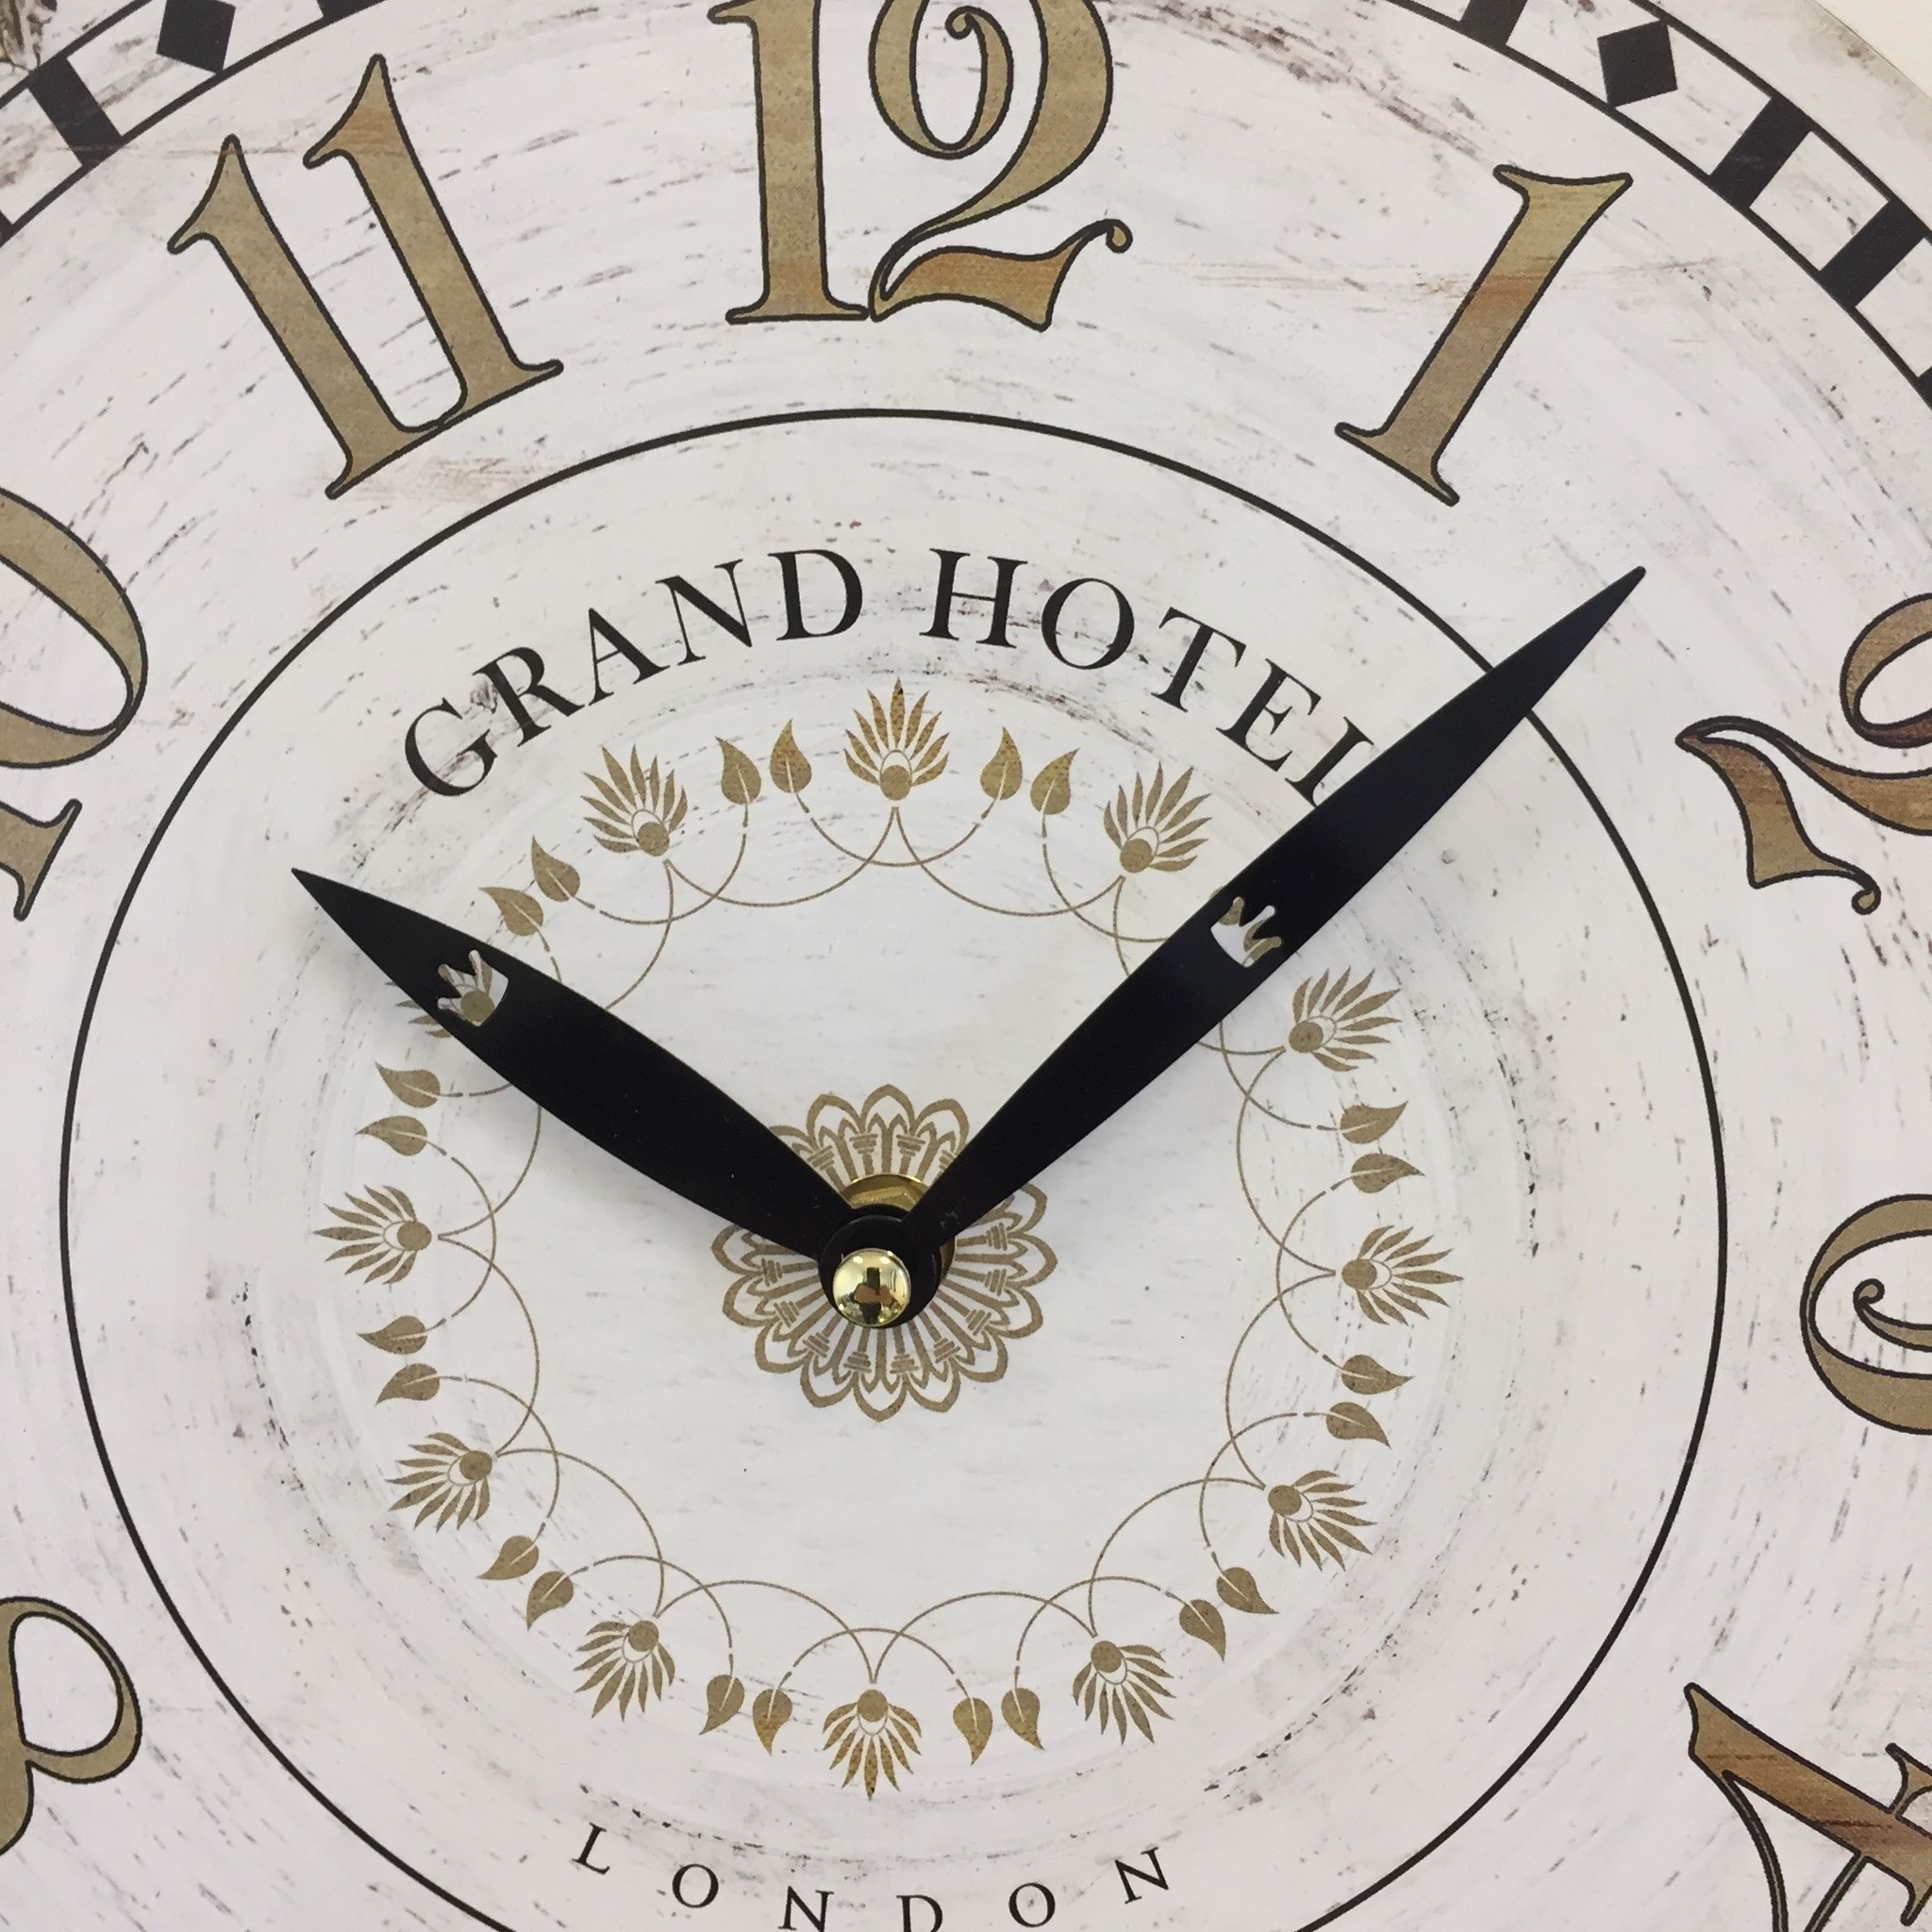 NiceTime BeoXL - Wanduhr Grand Hotel Londen Vintage retro wit